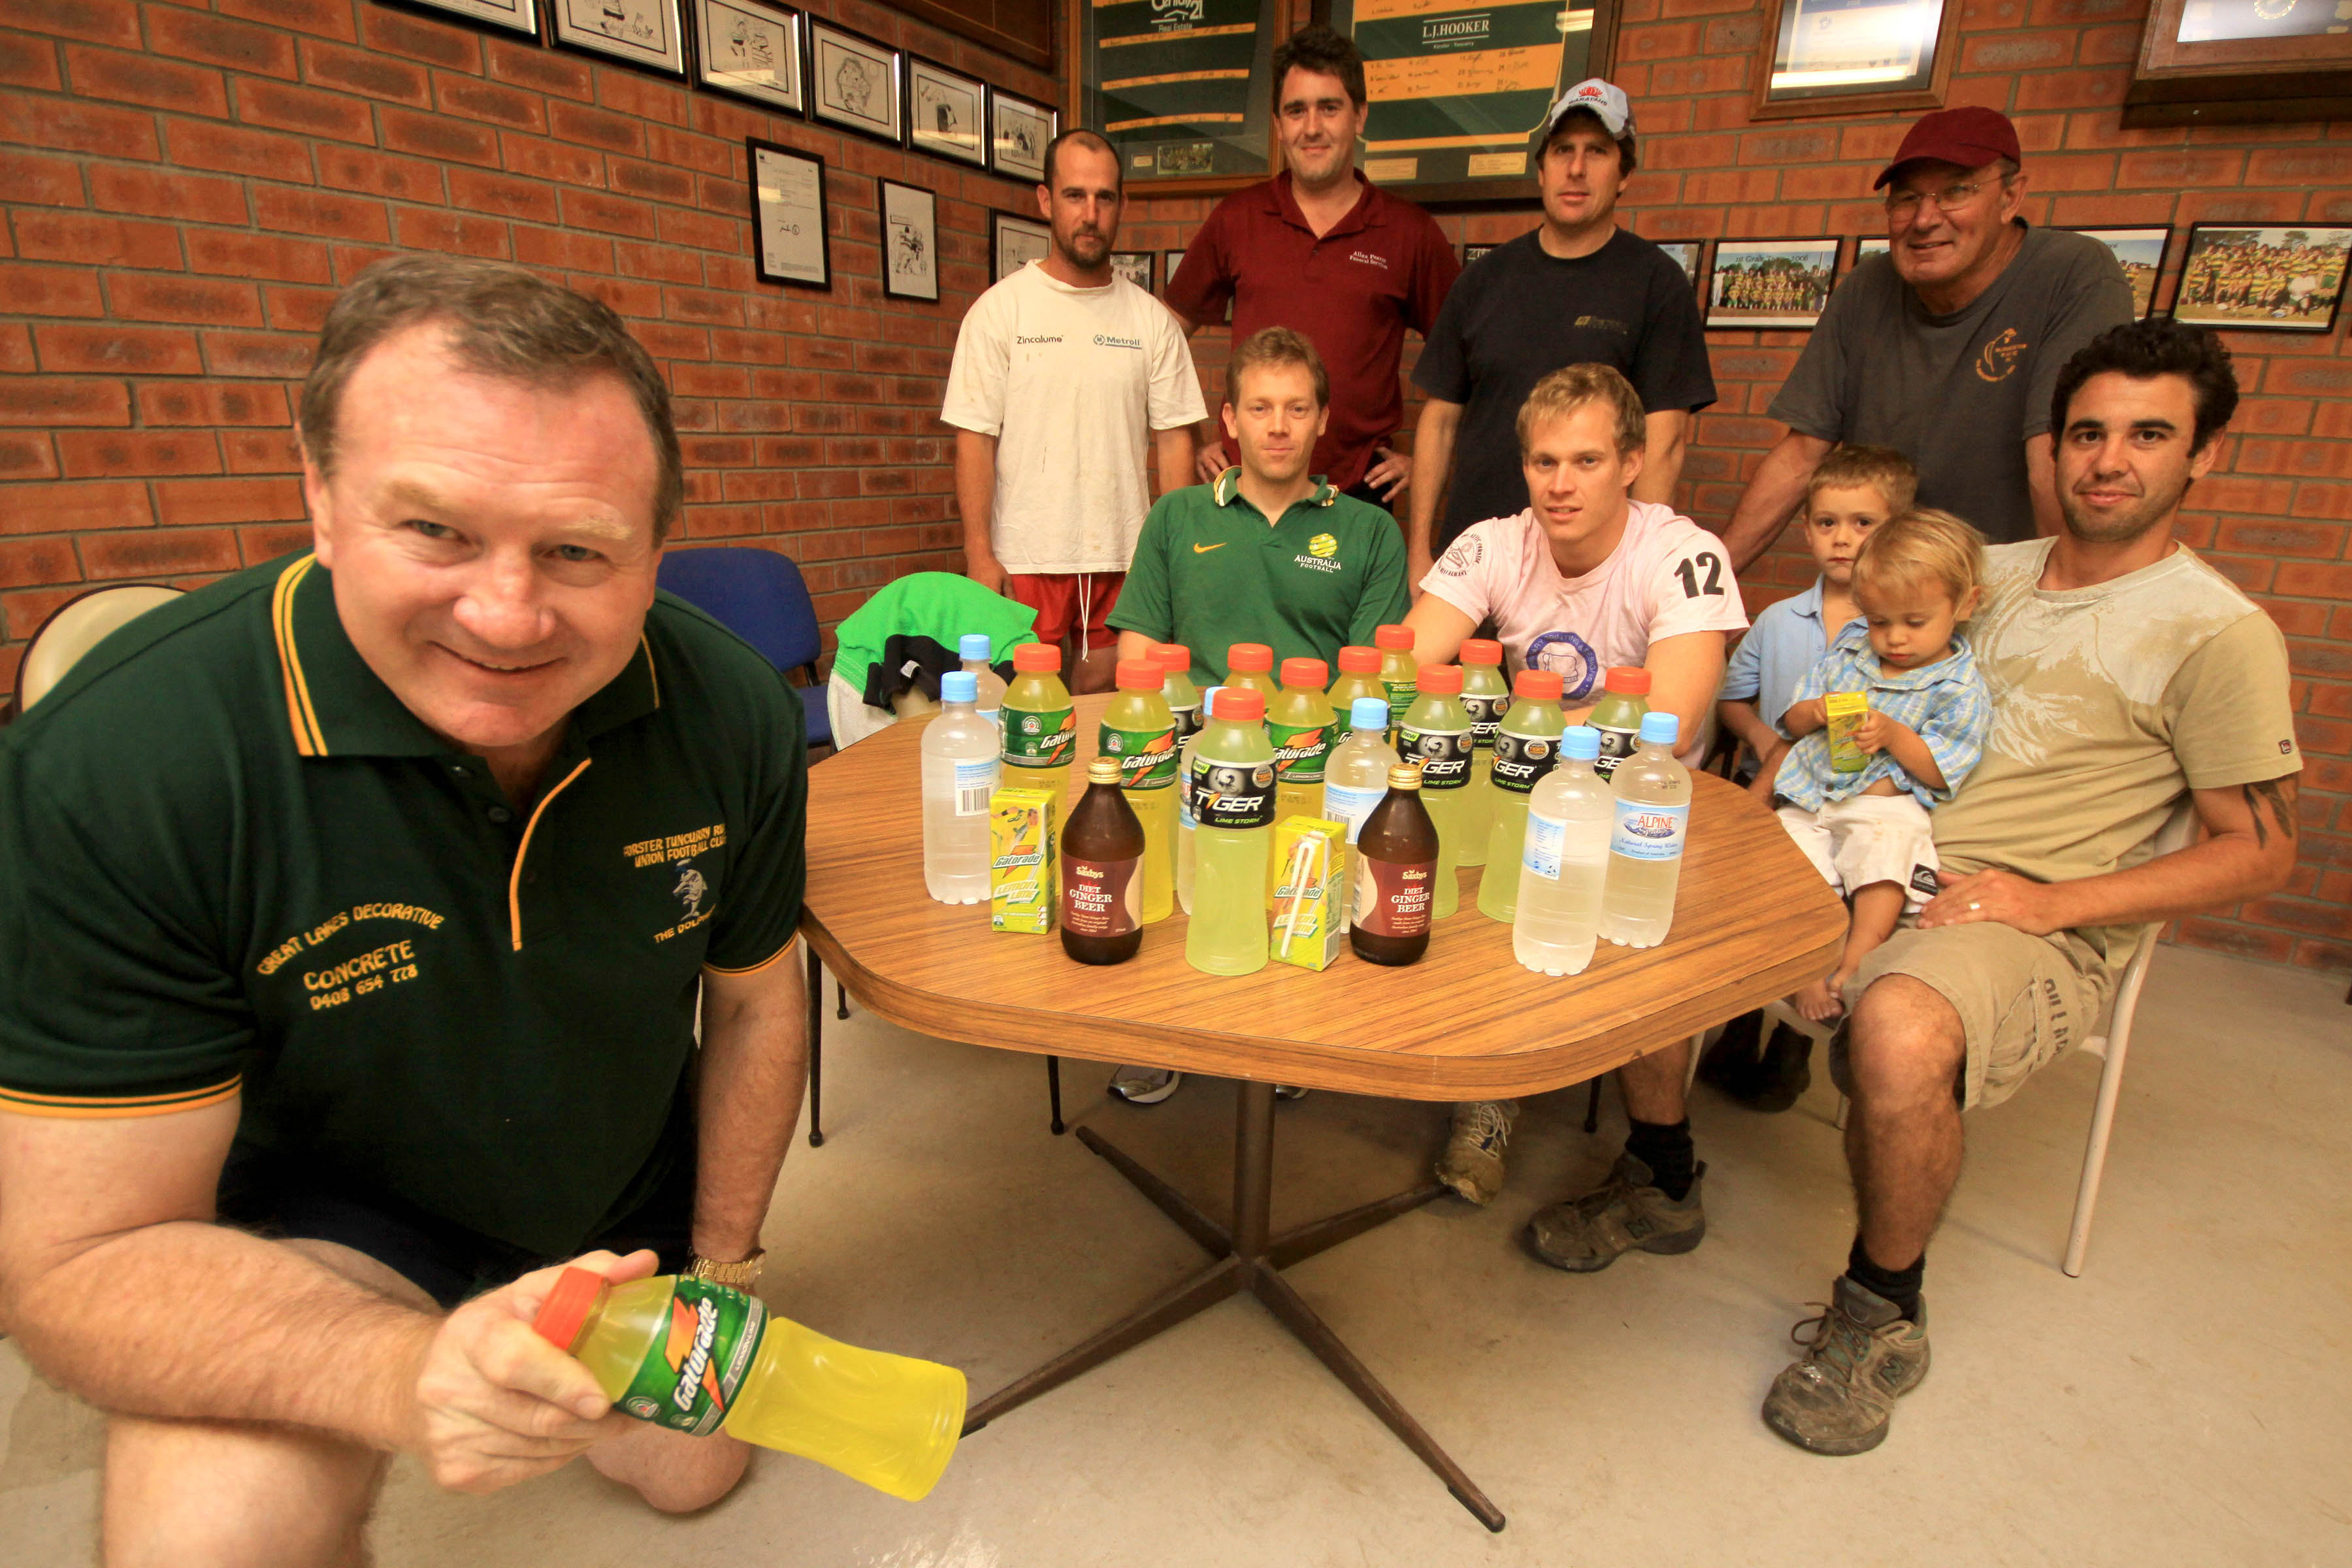 SHD News. Drinking in Sport. Stephen Bromhead is the president of the Foster Tuncurry Rugby Union Club which has turned its culture around after adopting new strategies to deal with alcohol abuse. Pic by Shane Chalker, 22nd October 2009